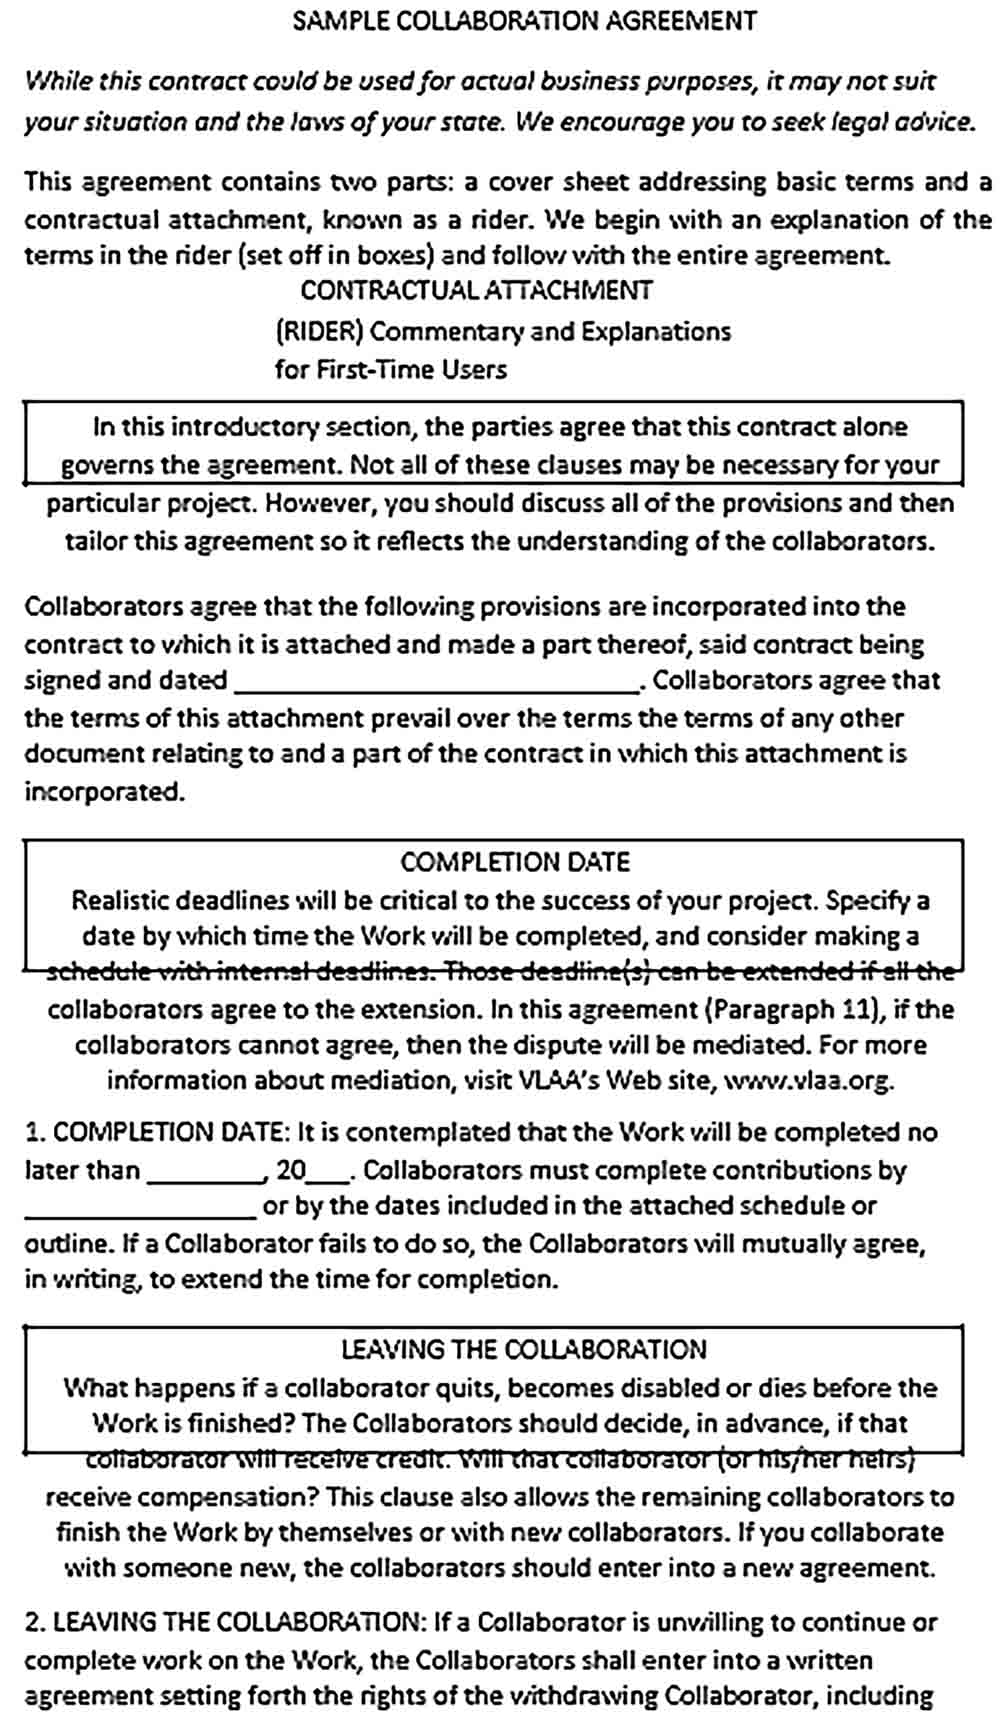 Sample Simple Collaboration Agreement